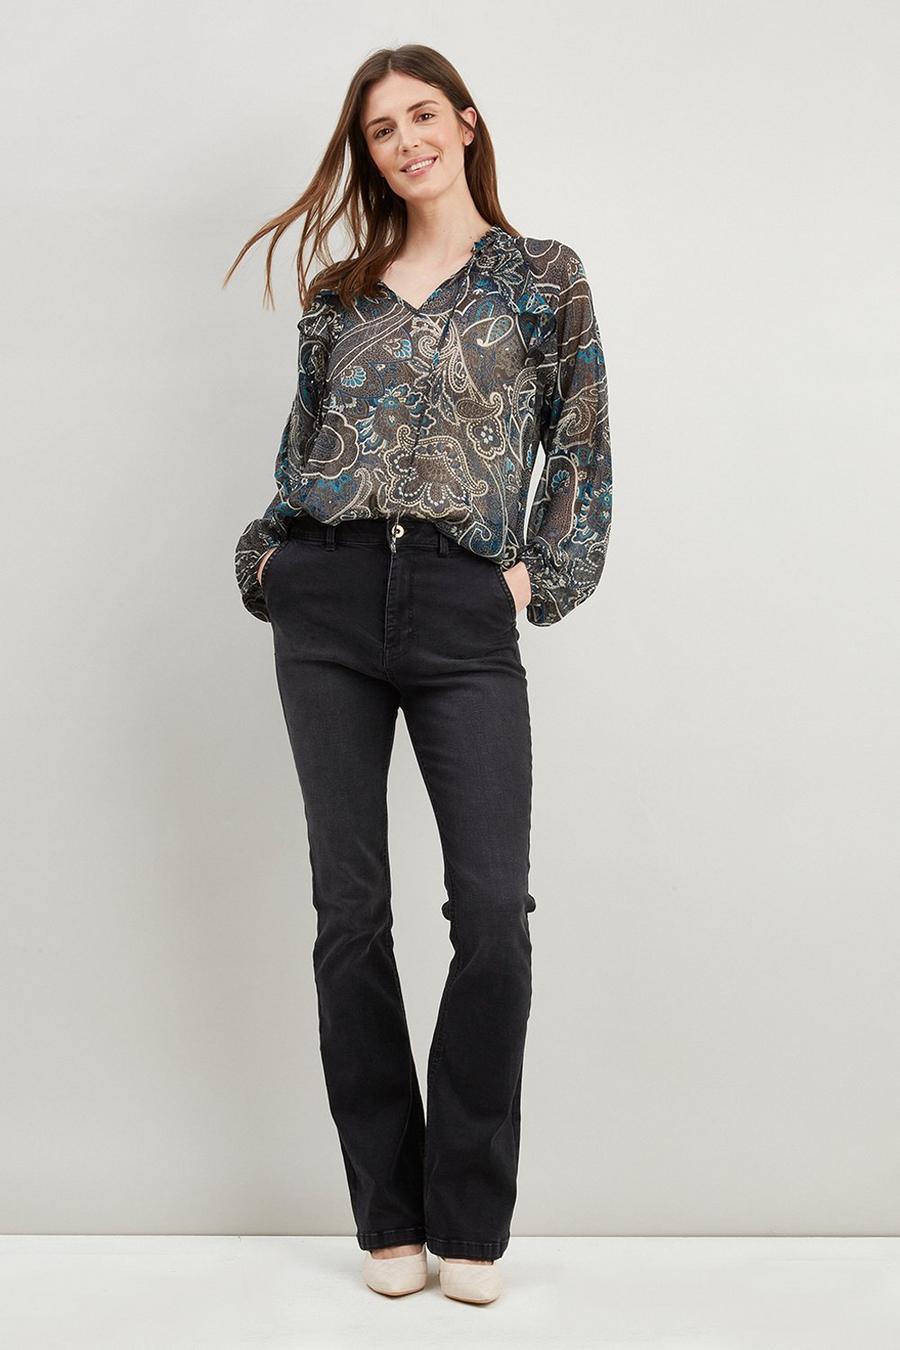 Teal Paisley Tie Neck Ruffle Top